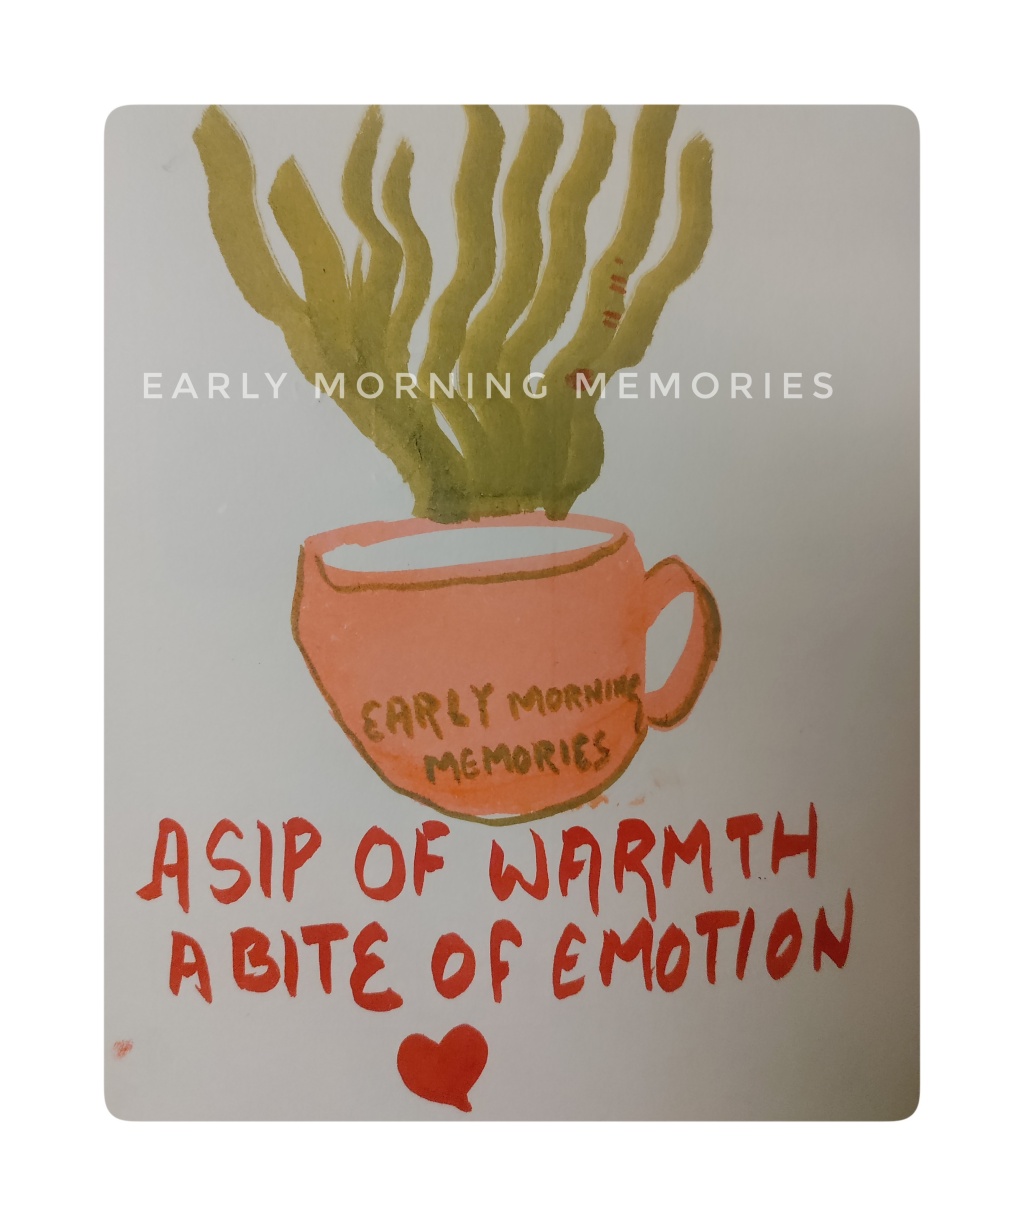 A Sip of Warmth, a Bite of Emotion